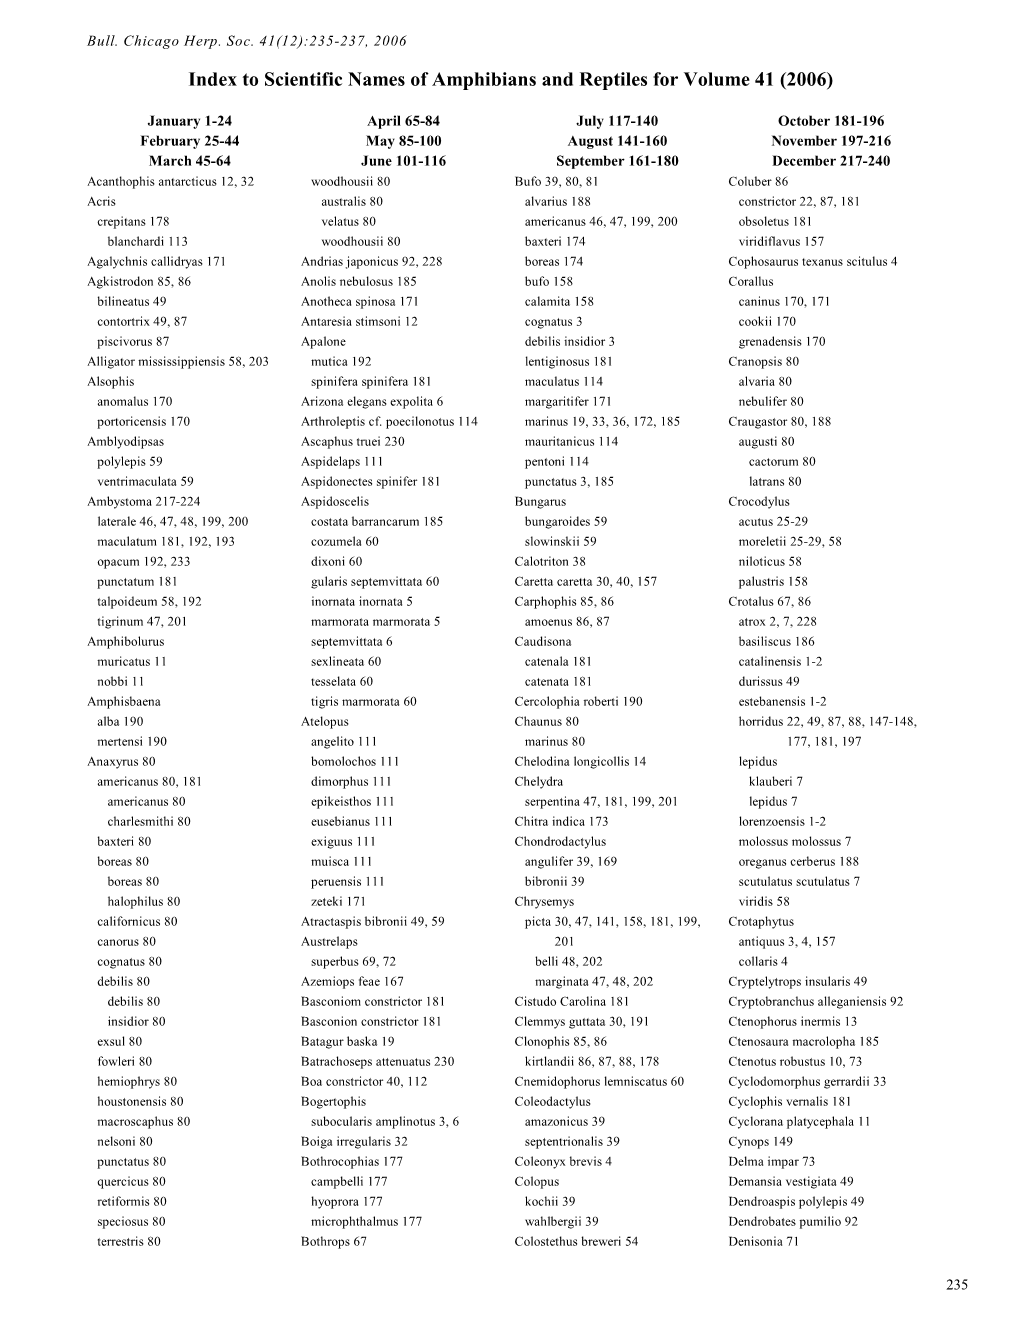 Index to Scientific Names of Amphibians and Reptiles for Volume 41 (2006)